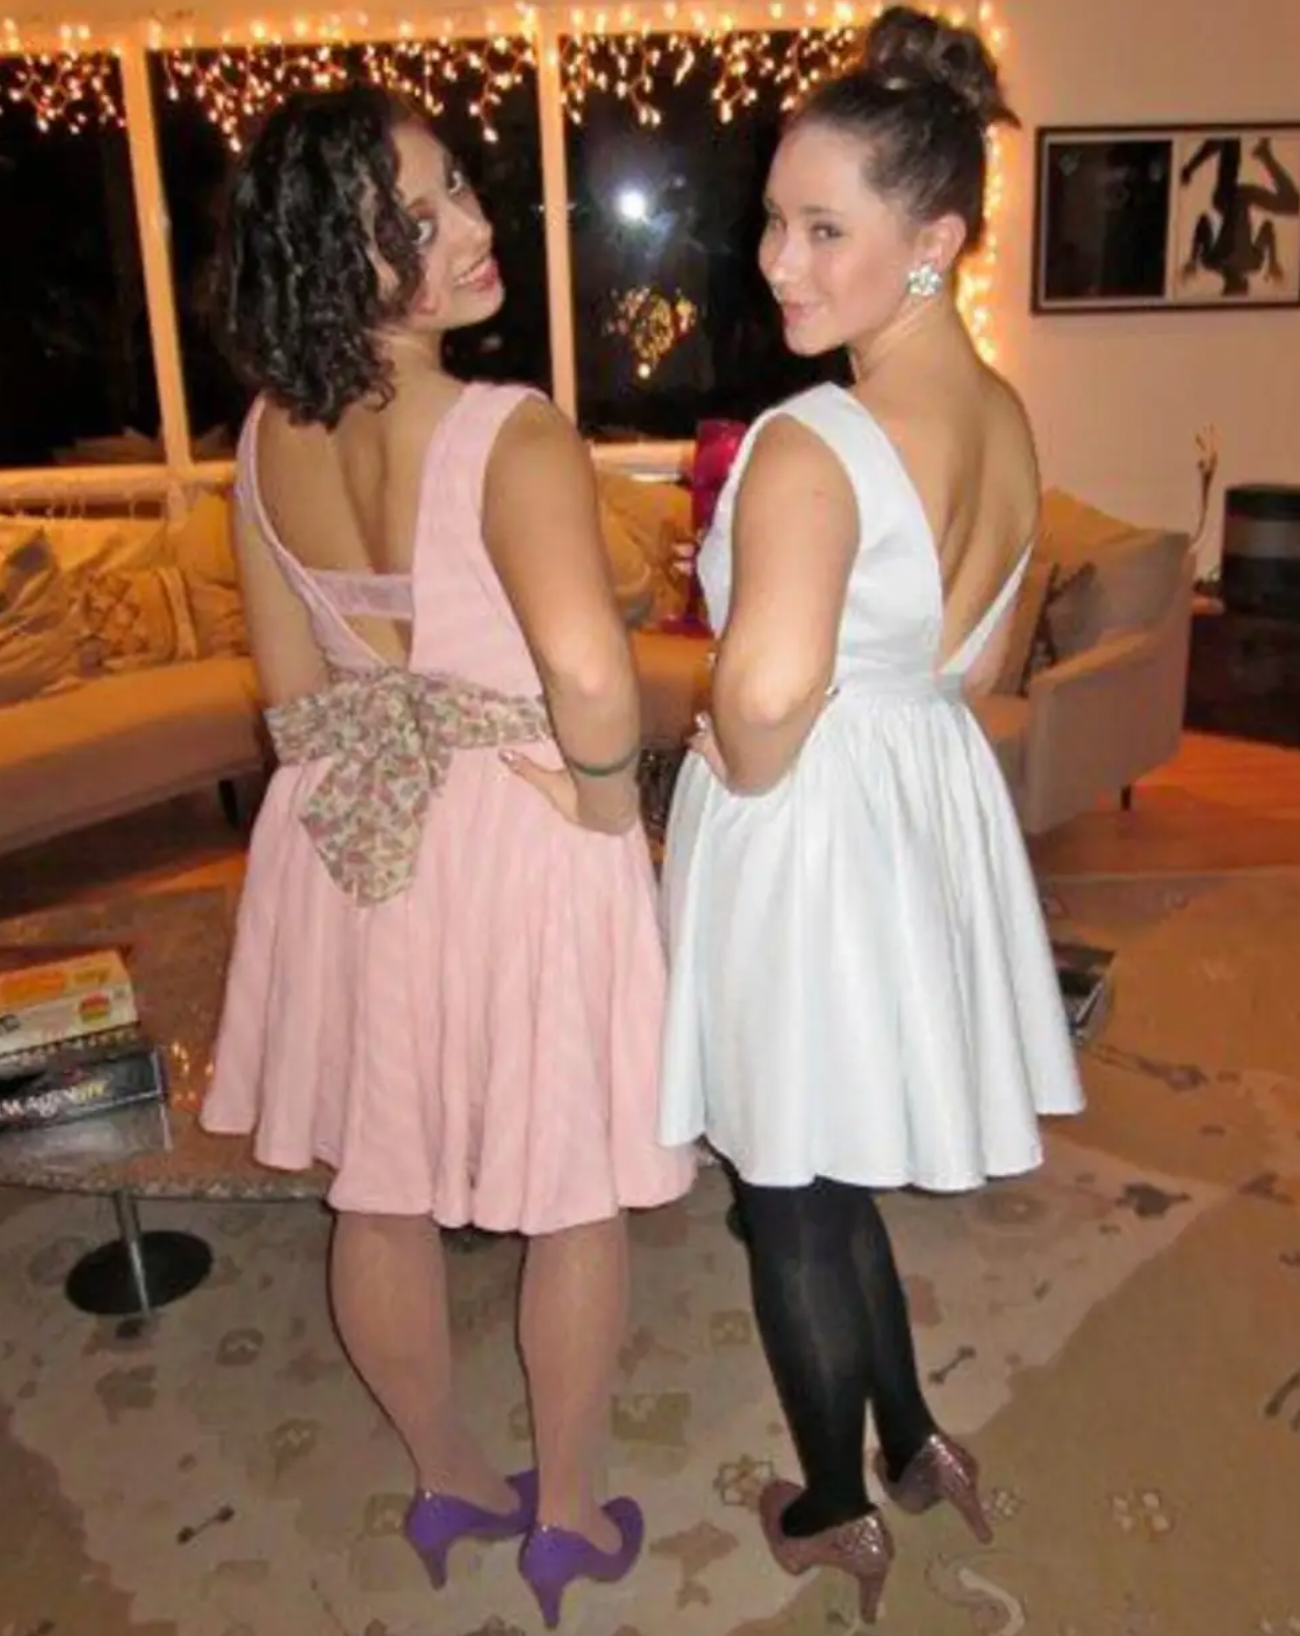 Showing the back of our dresses.